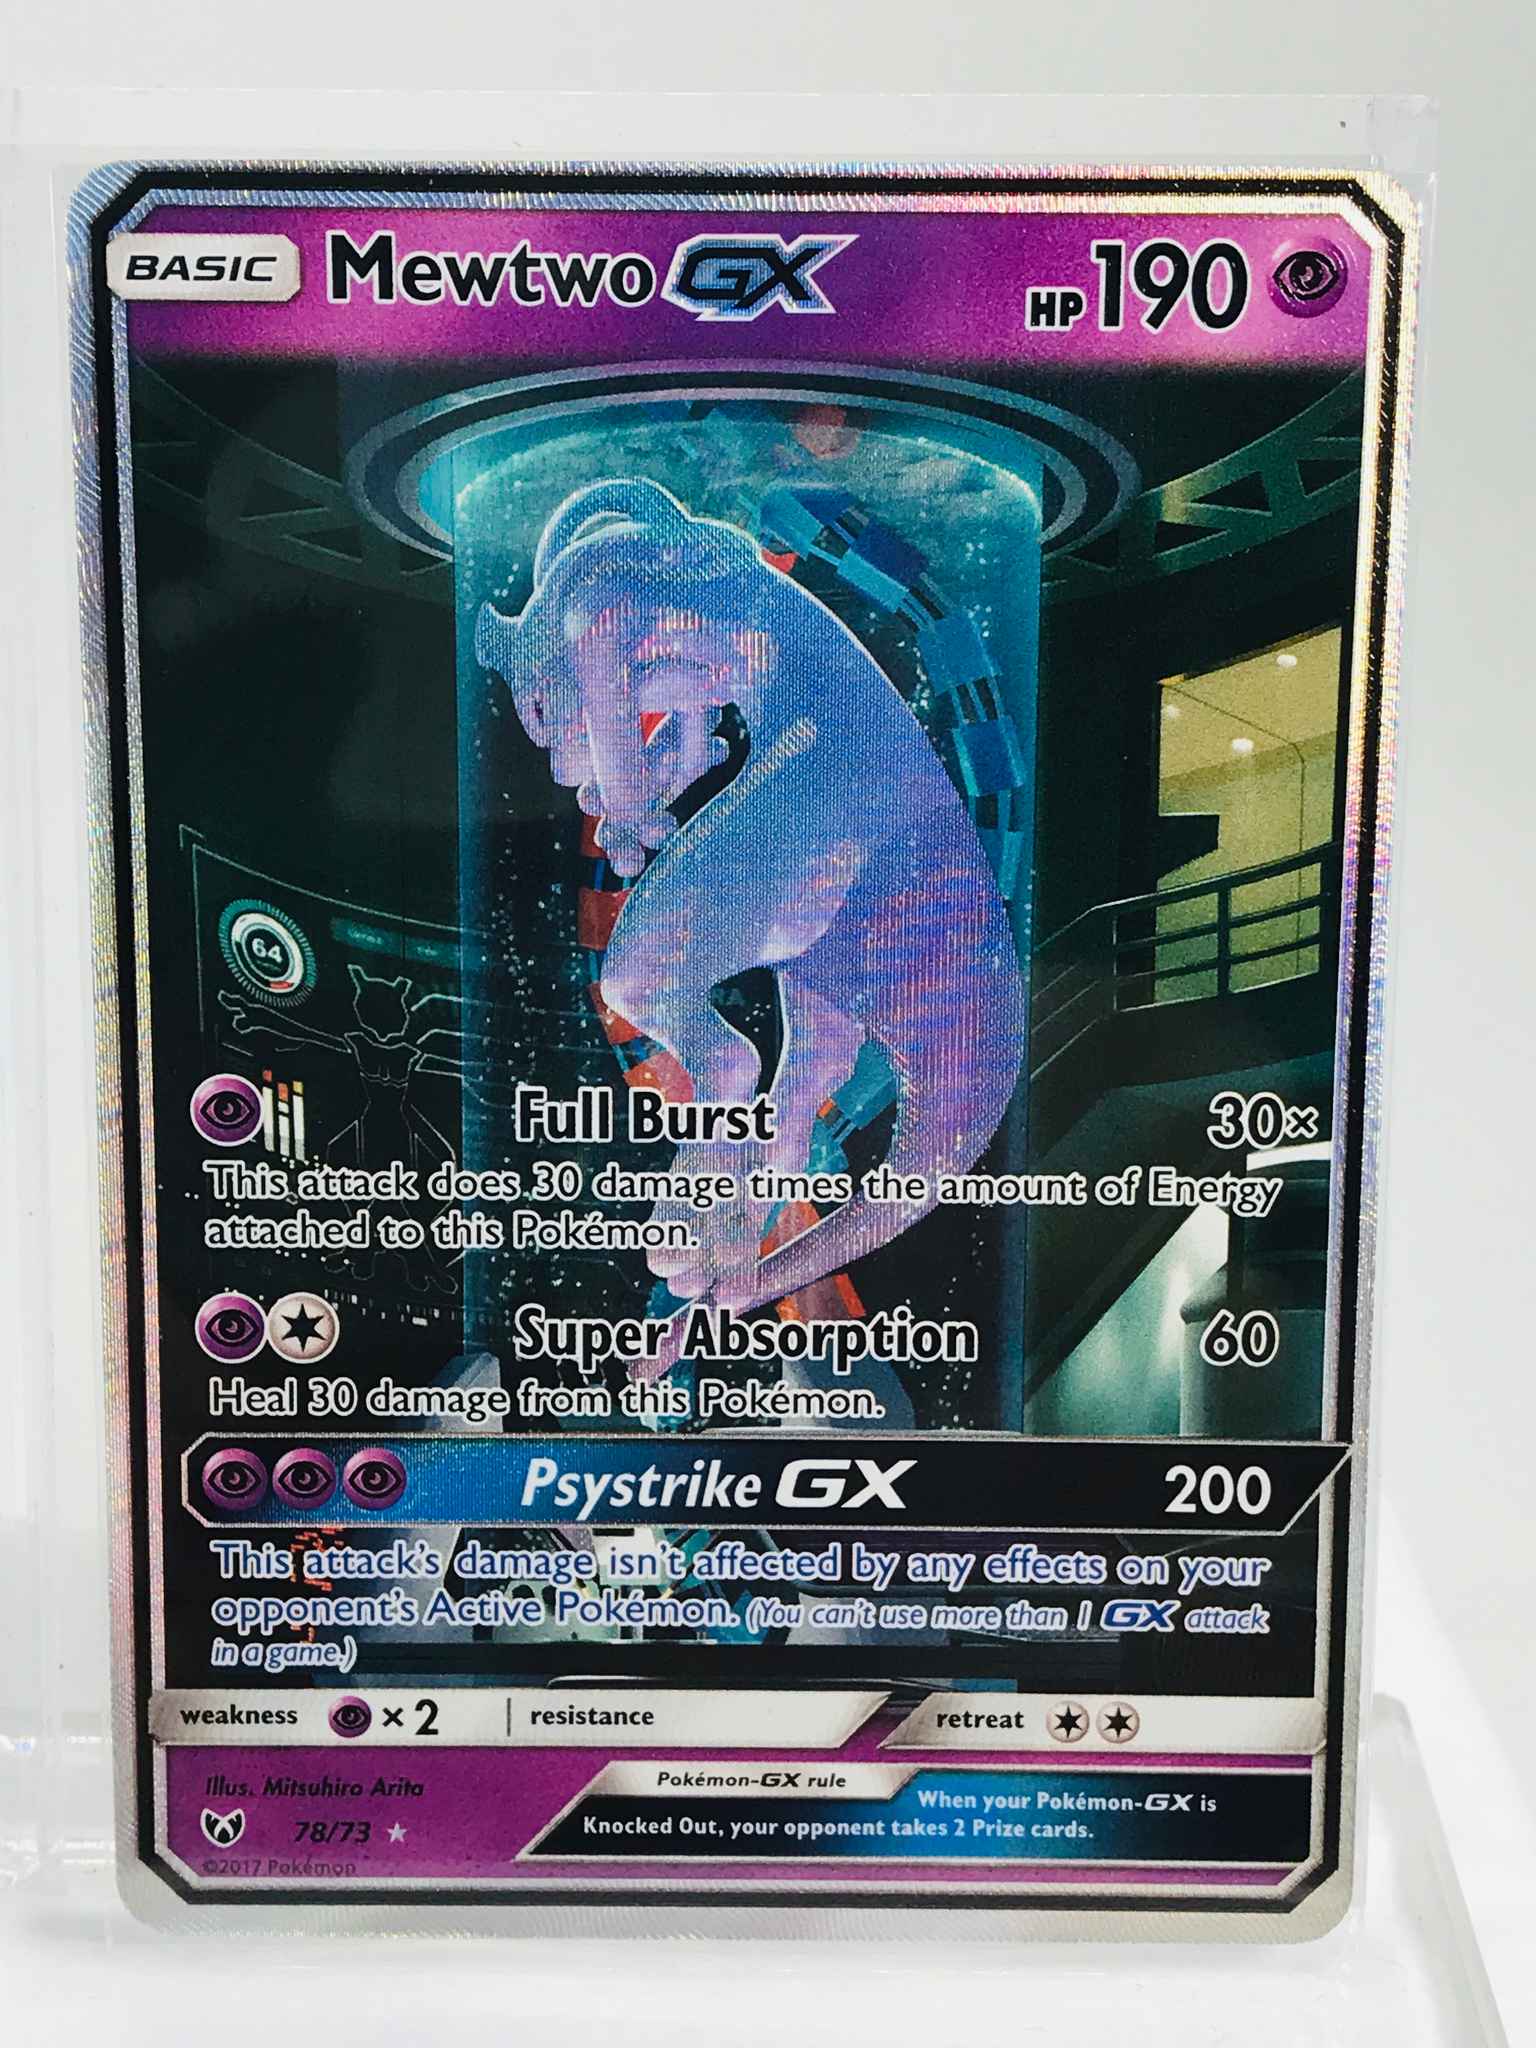 Mewtwo Gx Secret Shining Mewtwo Gx Secret Shining Shining Legends Pokemon Online Gaming Store For Cards Miniatures Singles Packs Booster Boxes